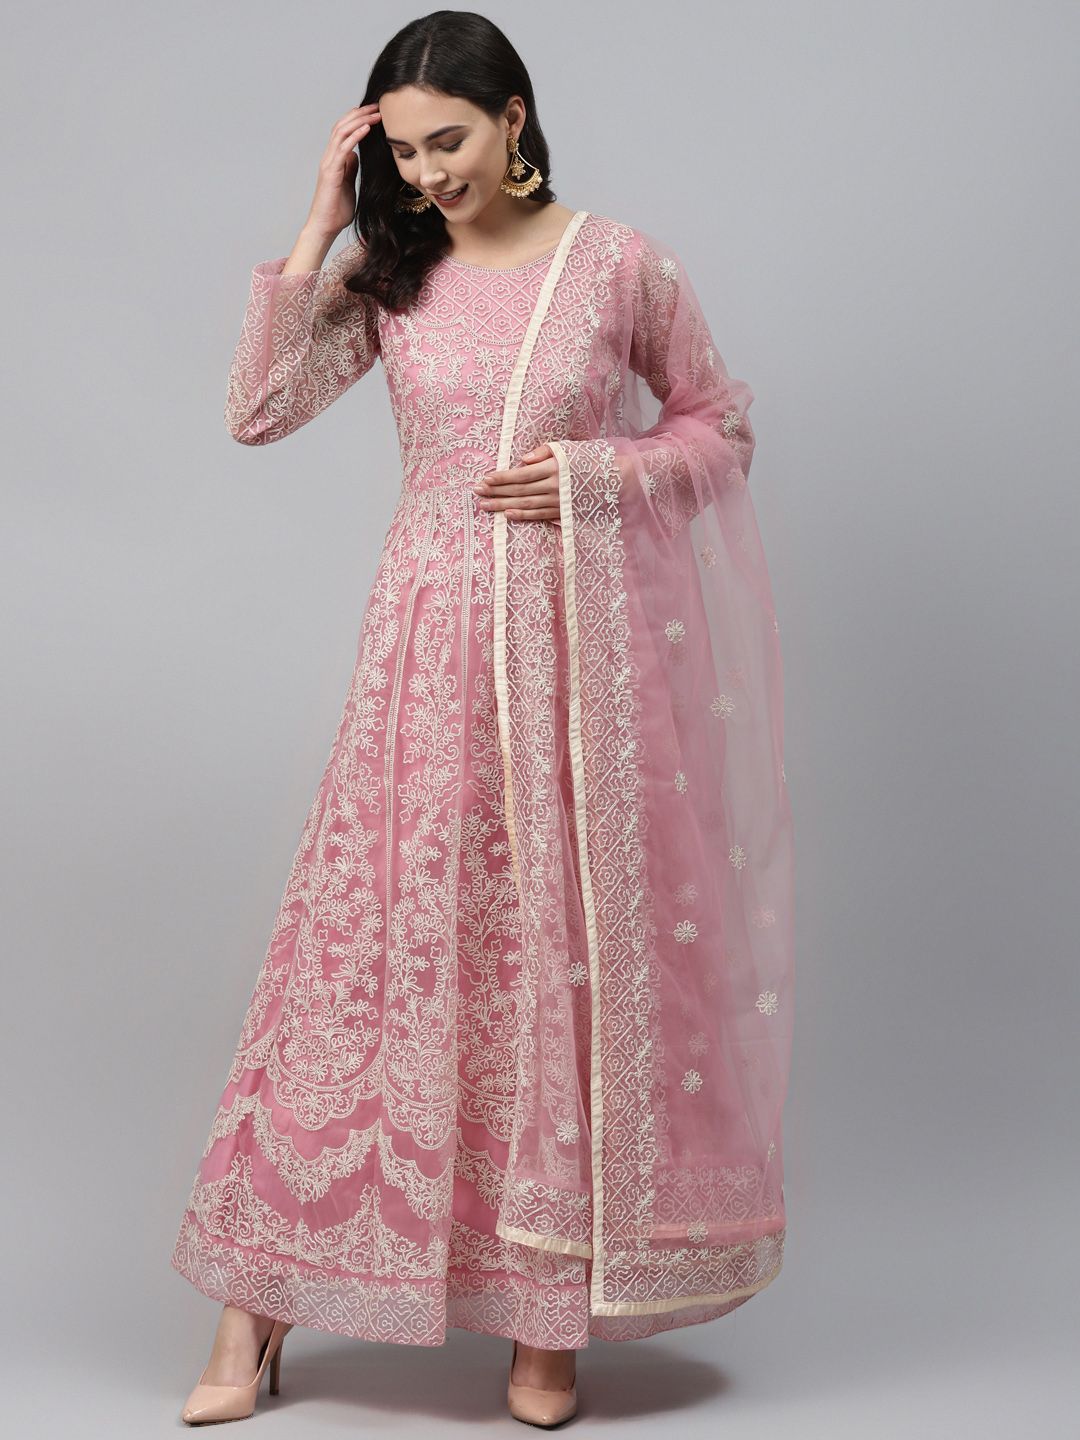 Readiprint Fashions Pink & Beige Net Embroidered Semi-Stitched Dress Material Price in India